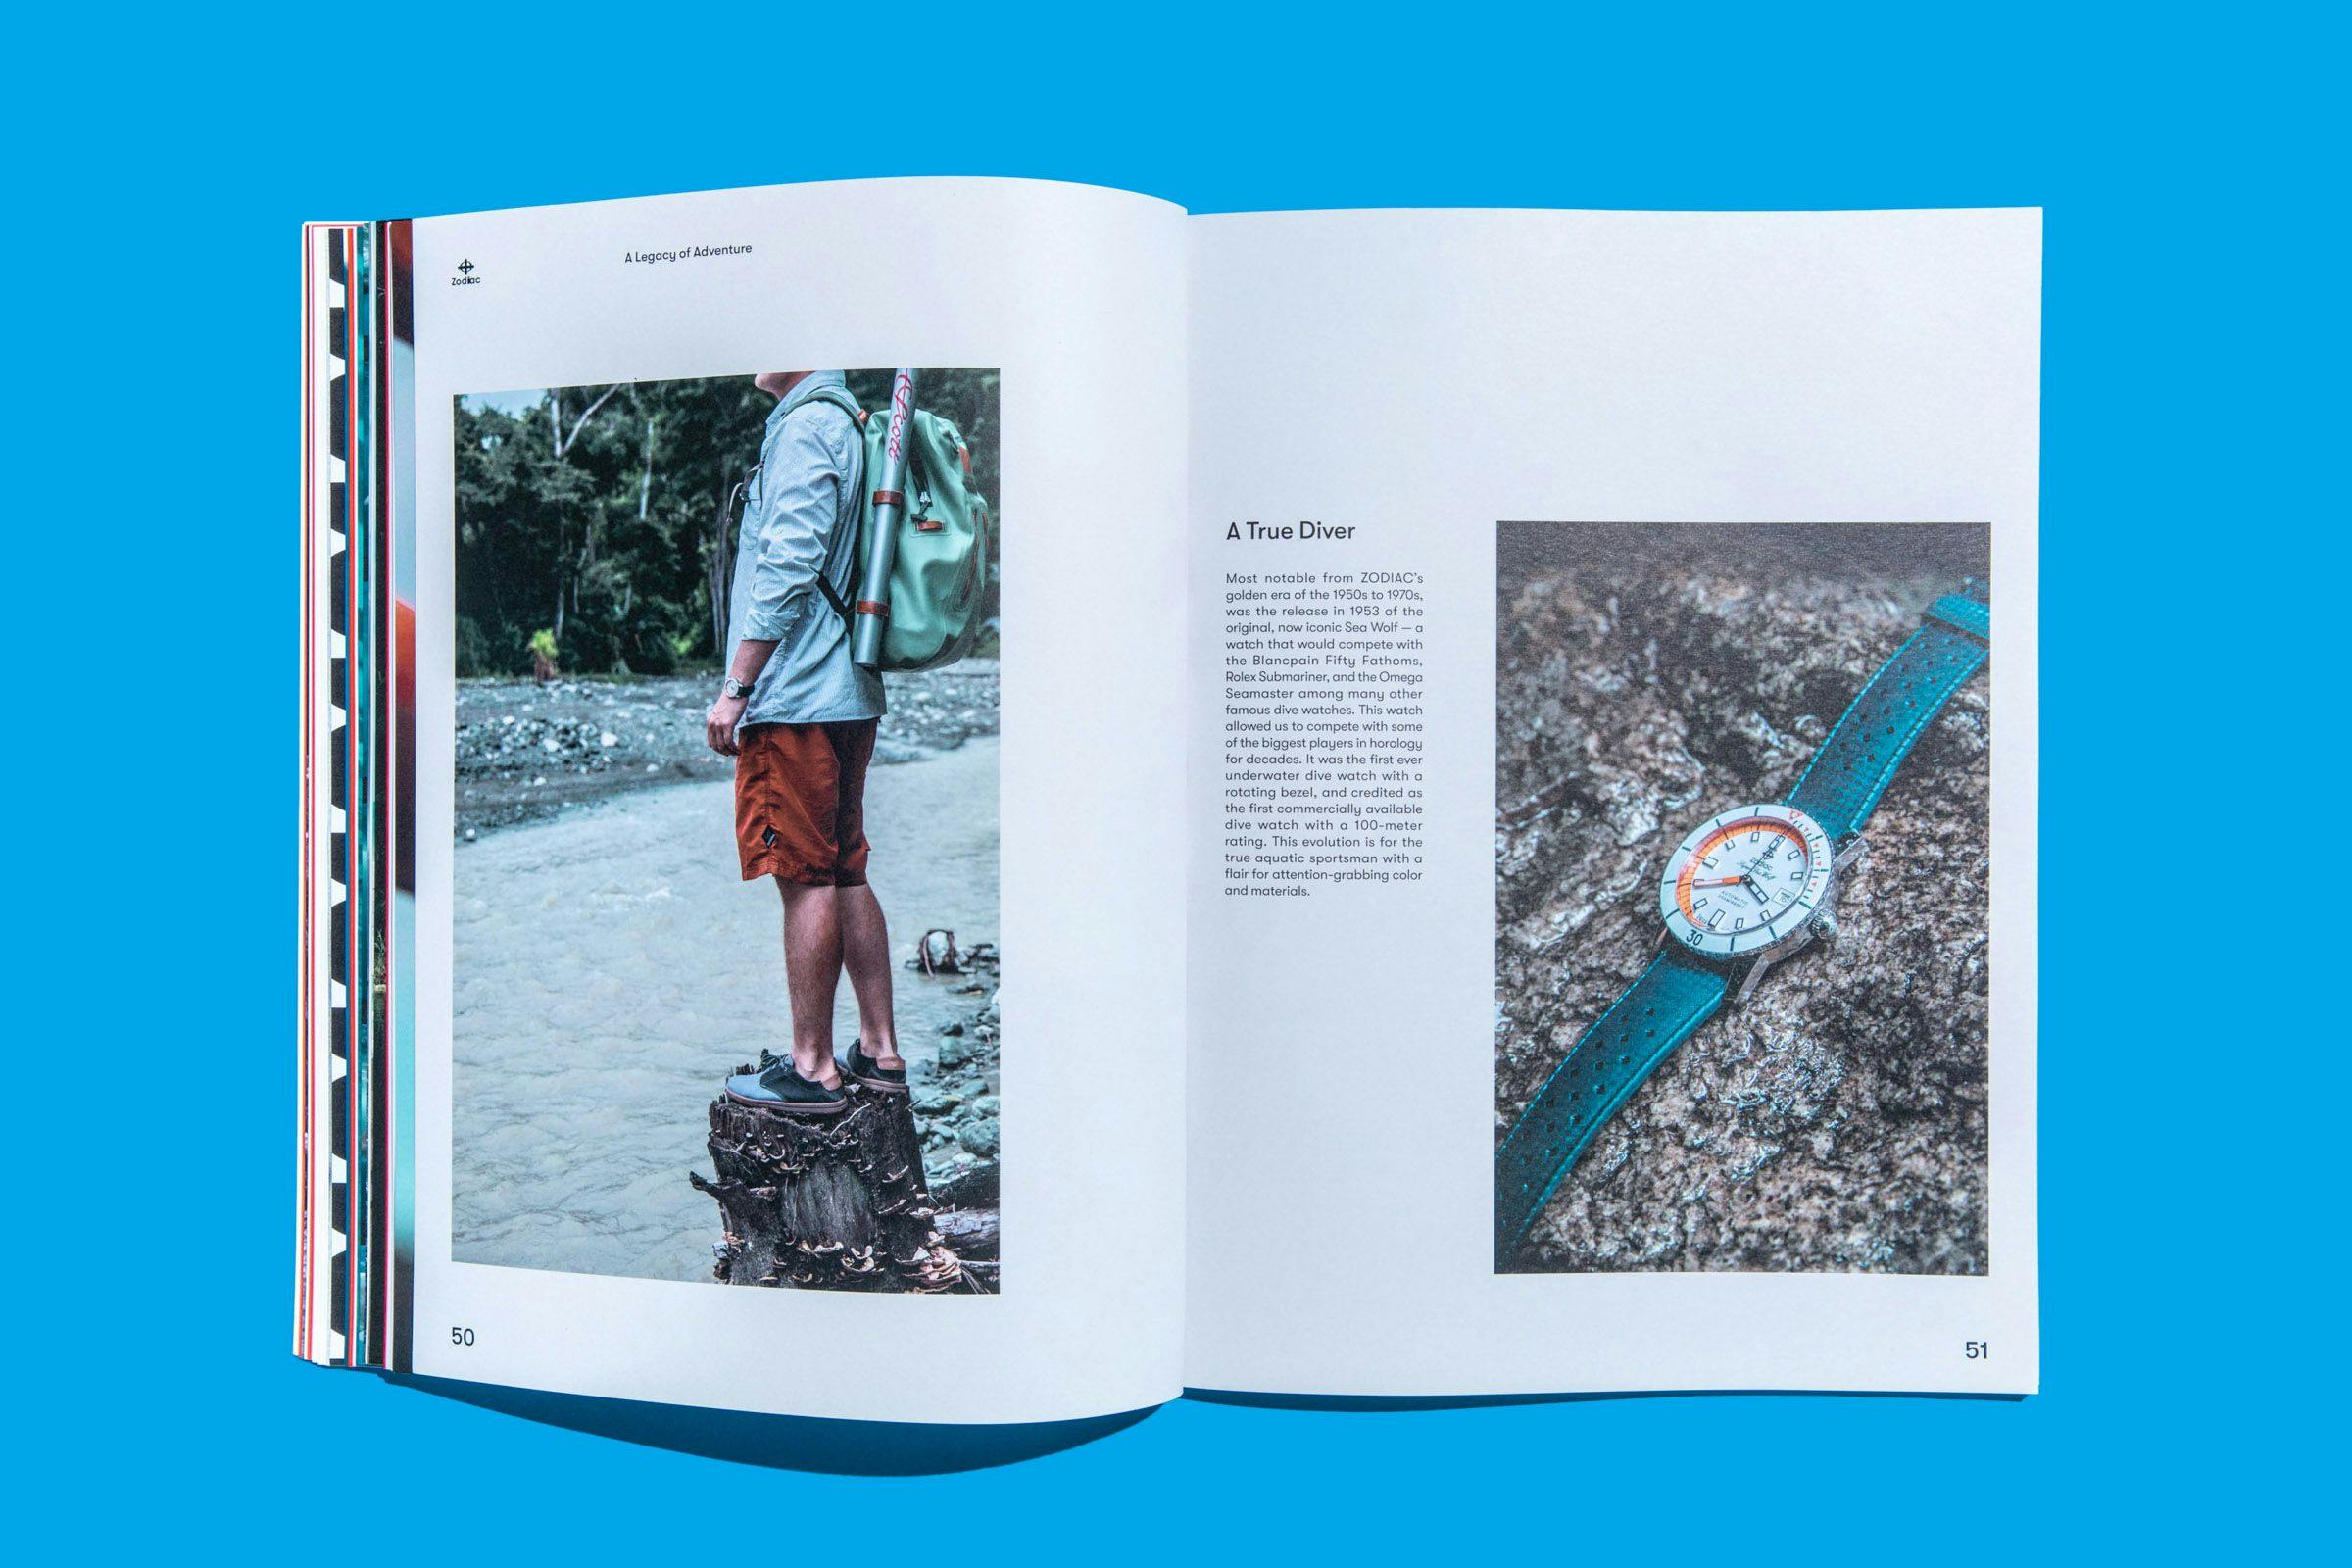 Pages in the Zodiac Watches: Brand Book with photos showing off brand products